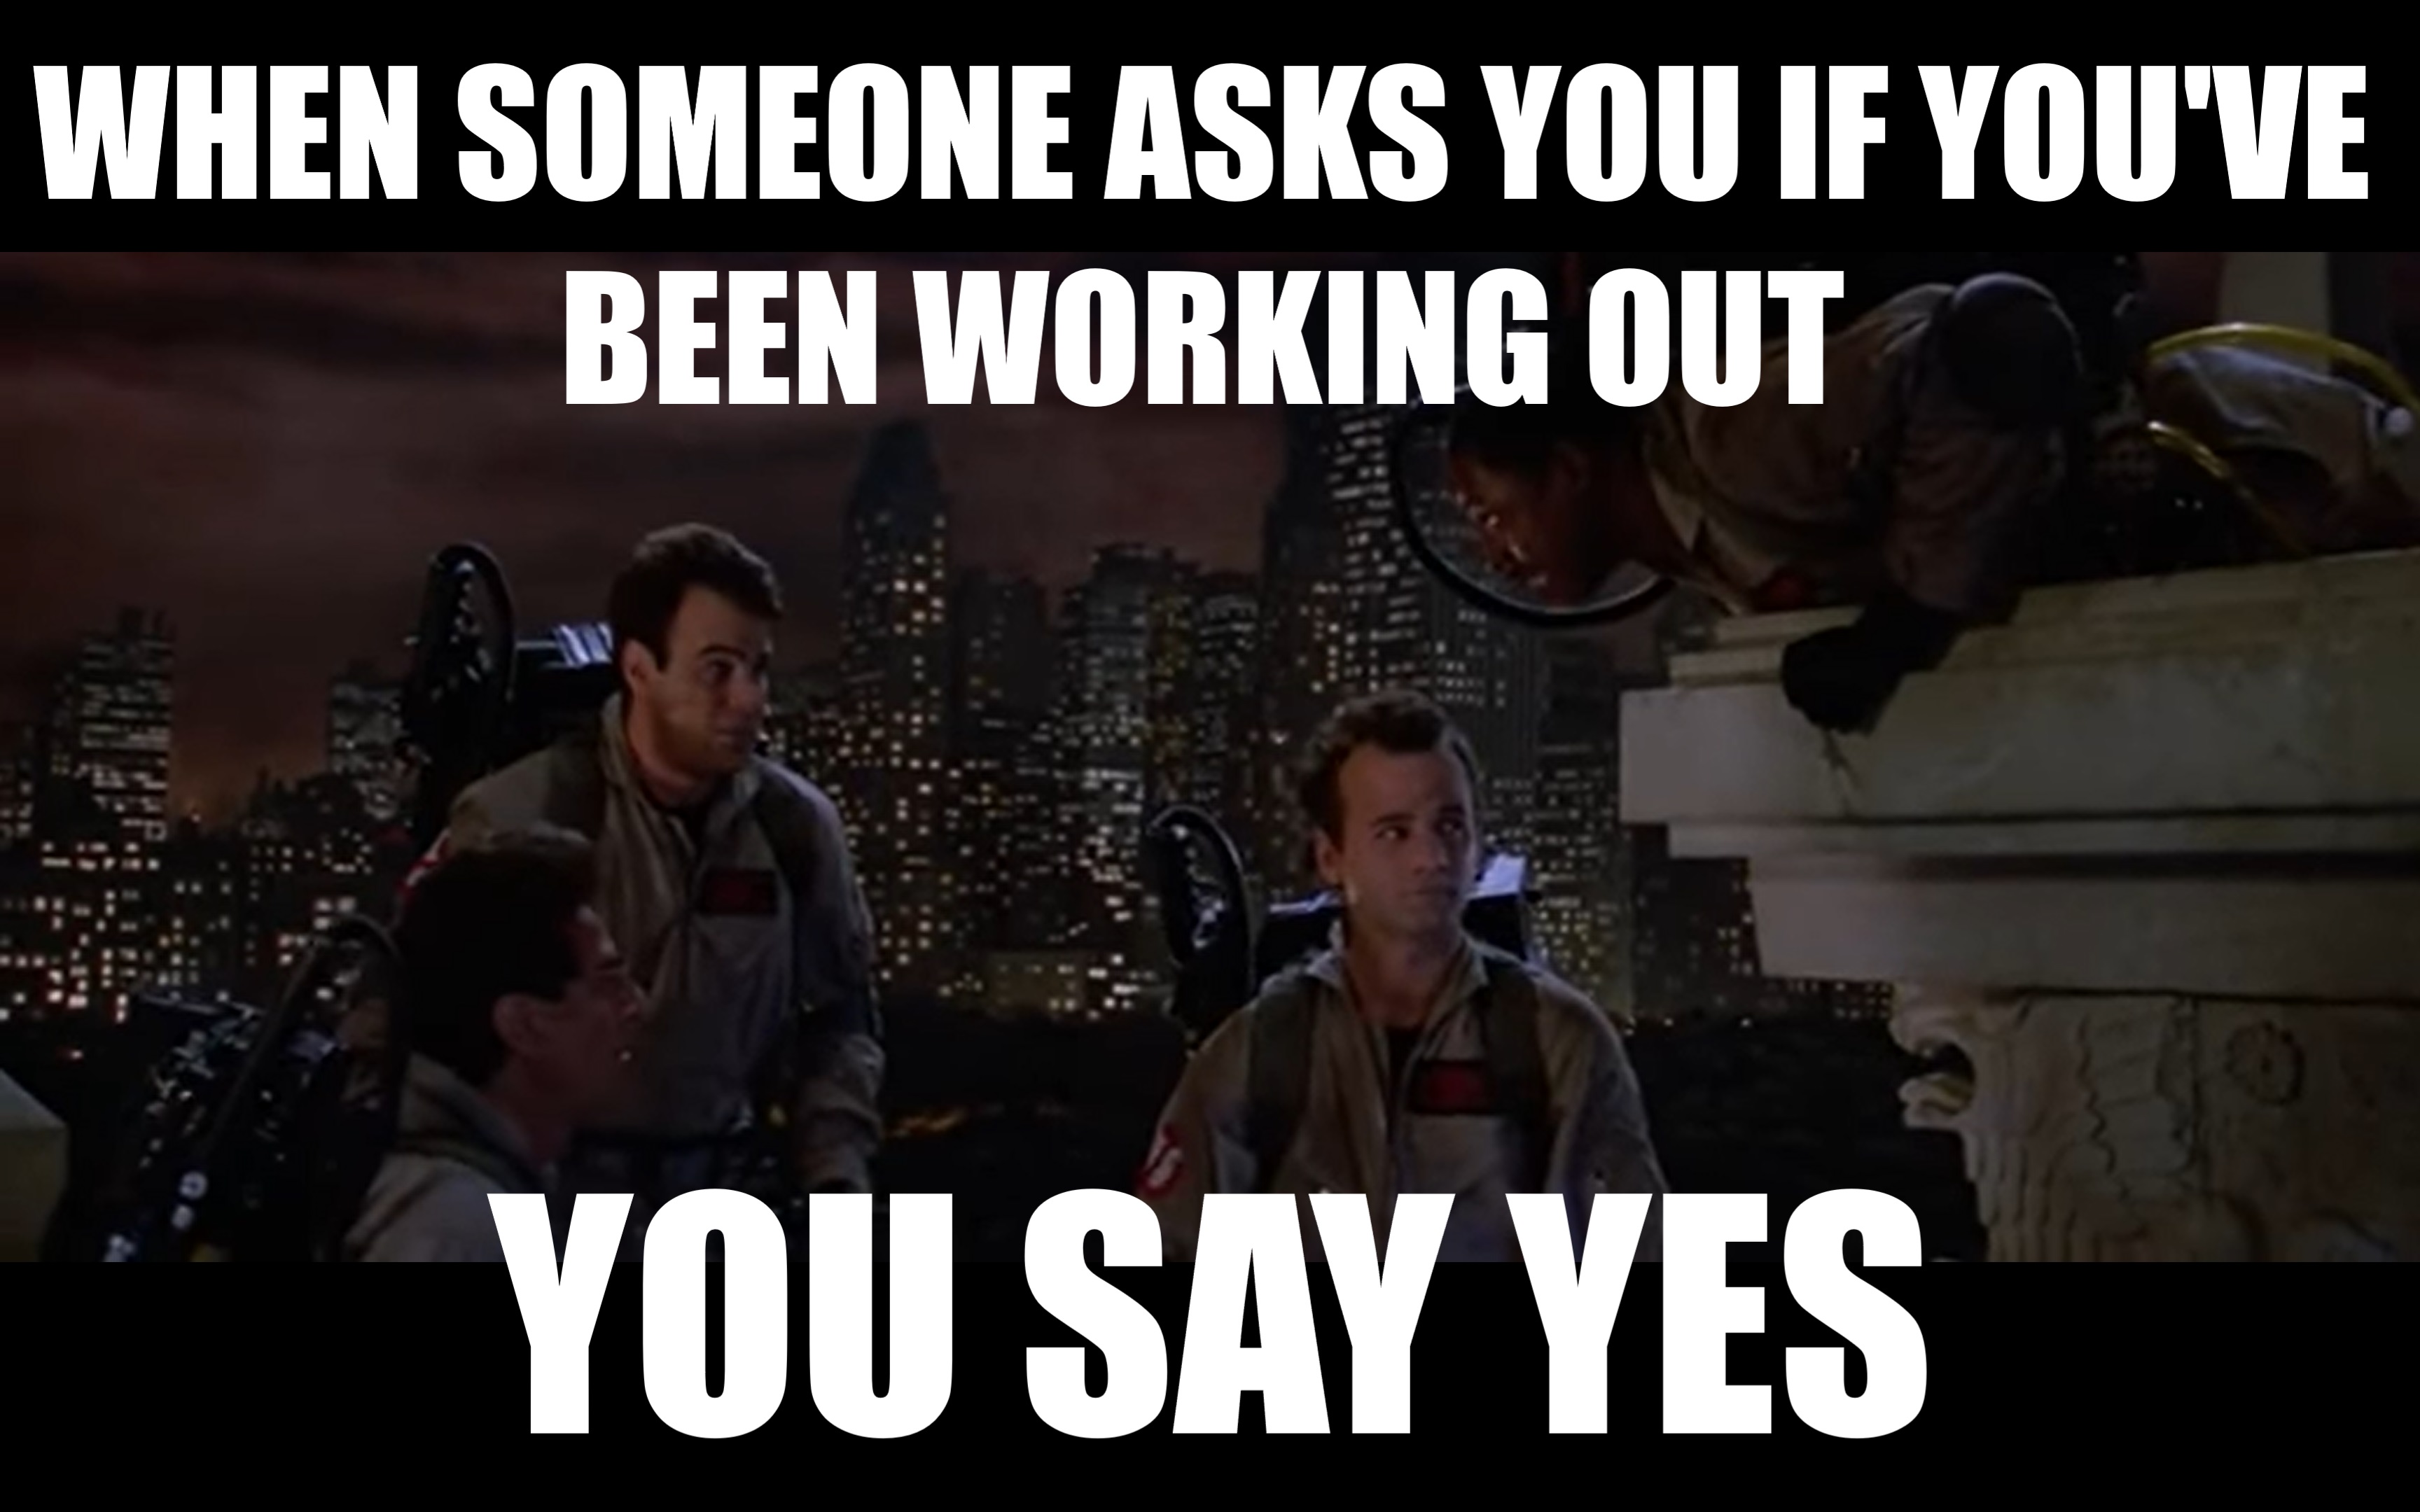 When someone asks you if you've been working out, you say YES!